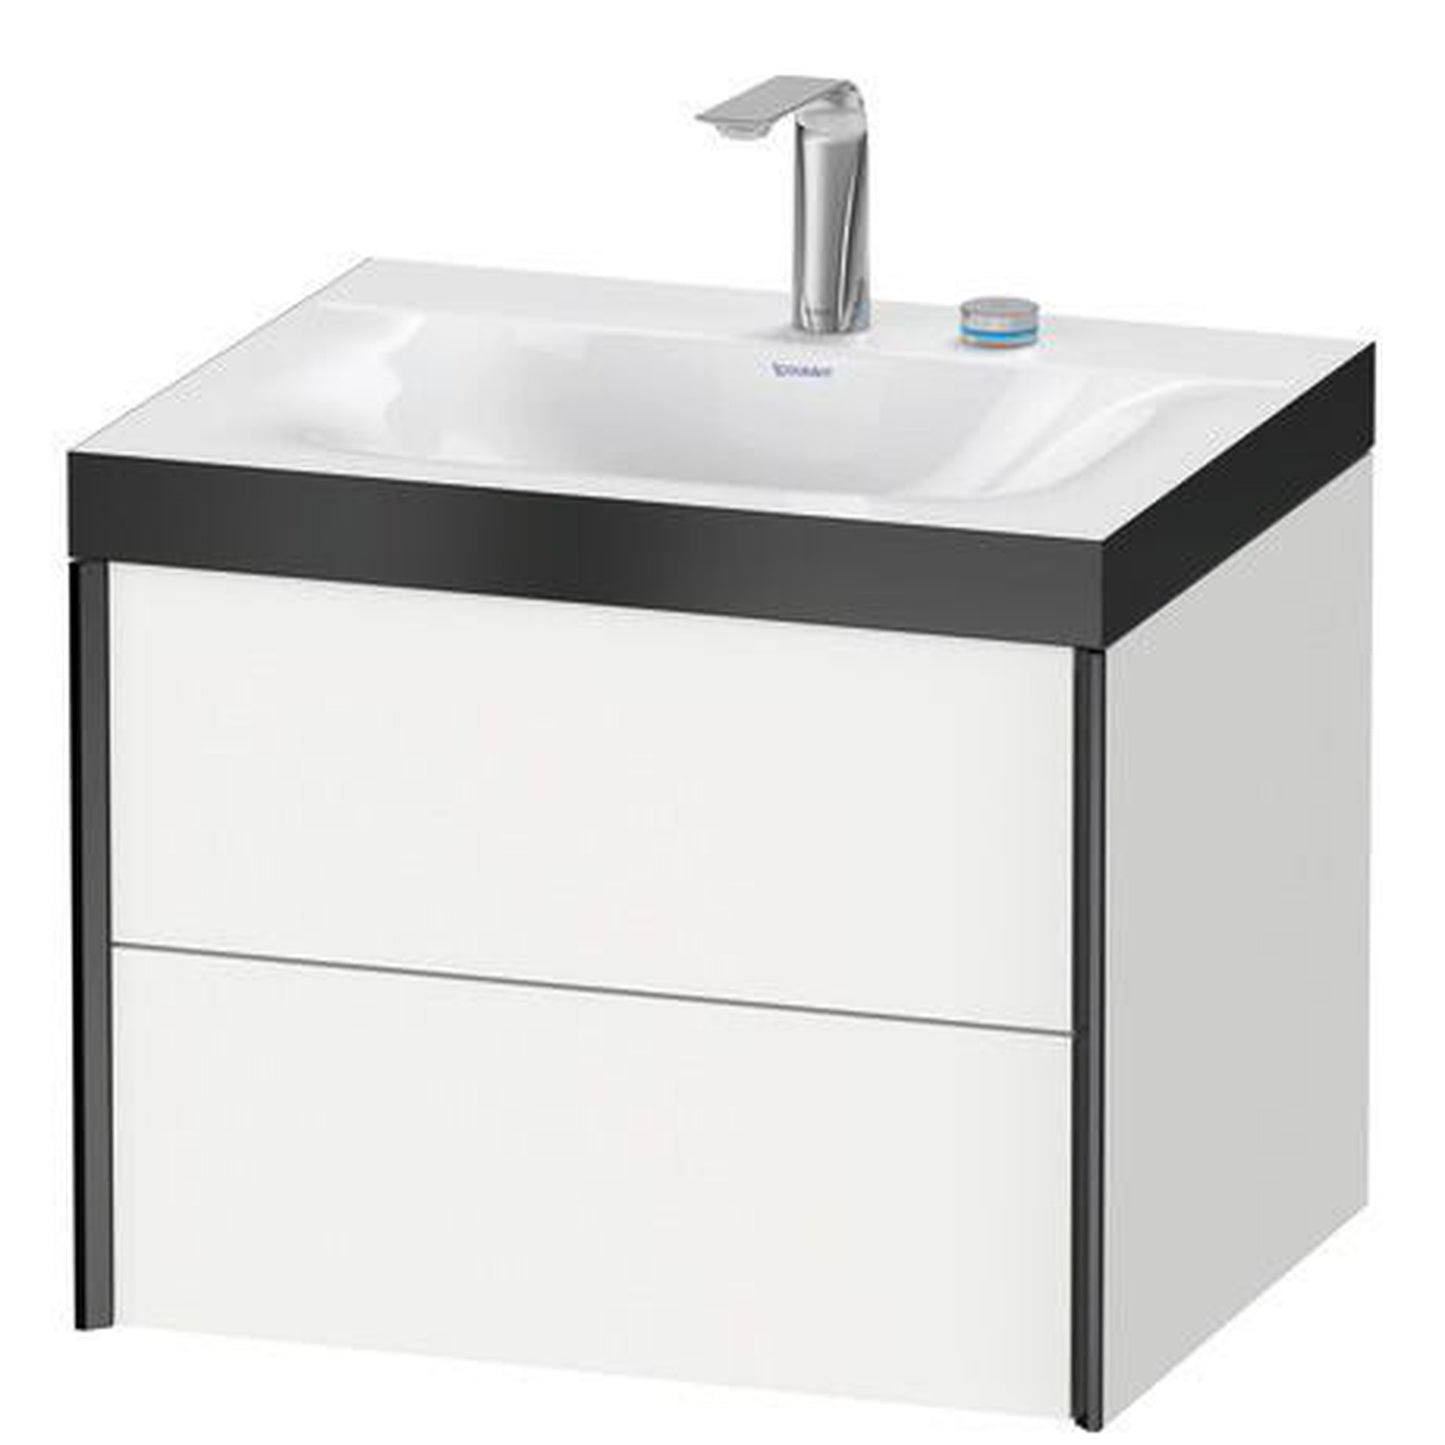 Duravit Xviu 24" x 20" x 19" Two Drawer C-Bonded Wall-Mount Vanity Kit With Two Tap Holes, White (XV4614EB218P)